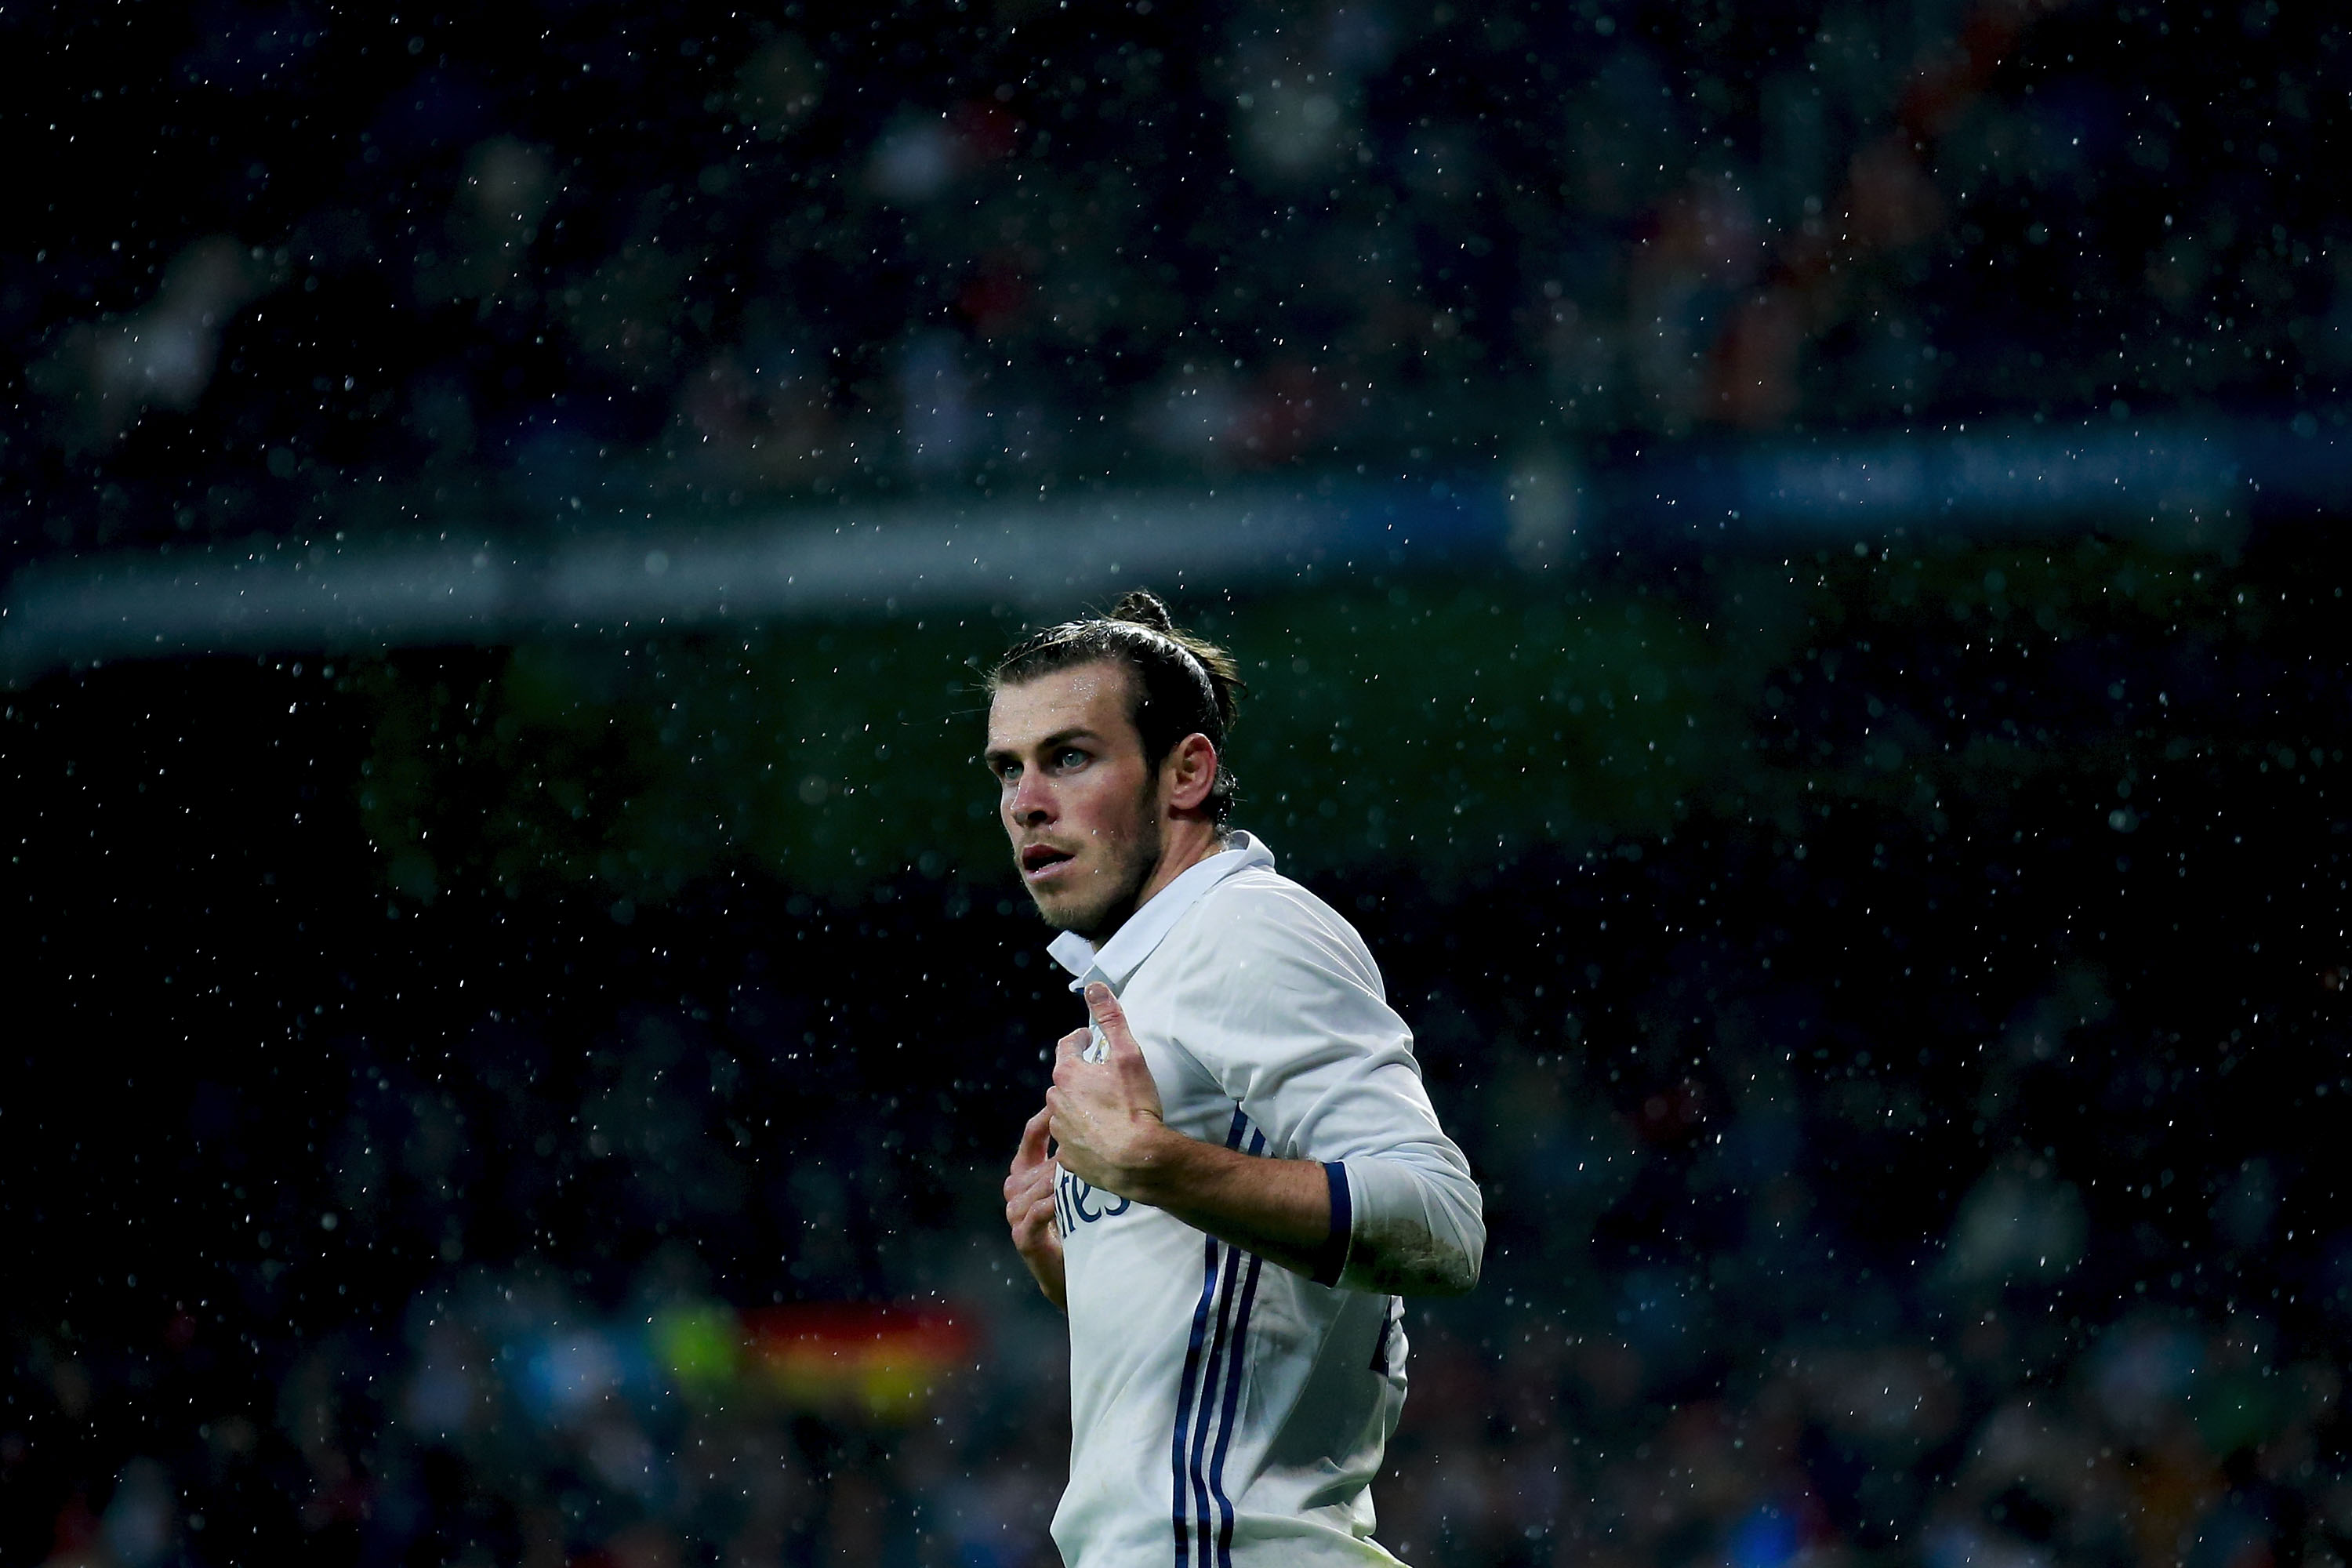 MADRID, SPAIN - OCTOBER 23: Gareth Bale of Real Madrid CF protests to the referee during the La Liga match between Real Madrid CF and Athletic Club de Bilbao at Estadio Santiago Bernabeu on October 23, 2016 in Madrid, Spain. (Photo by Gonzalo Arroyo Moreno/Getty Images)